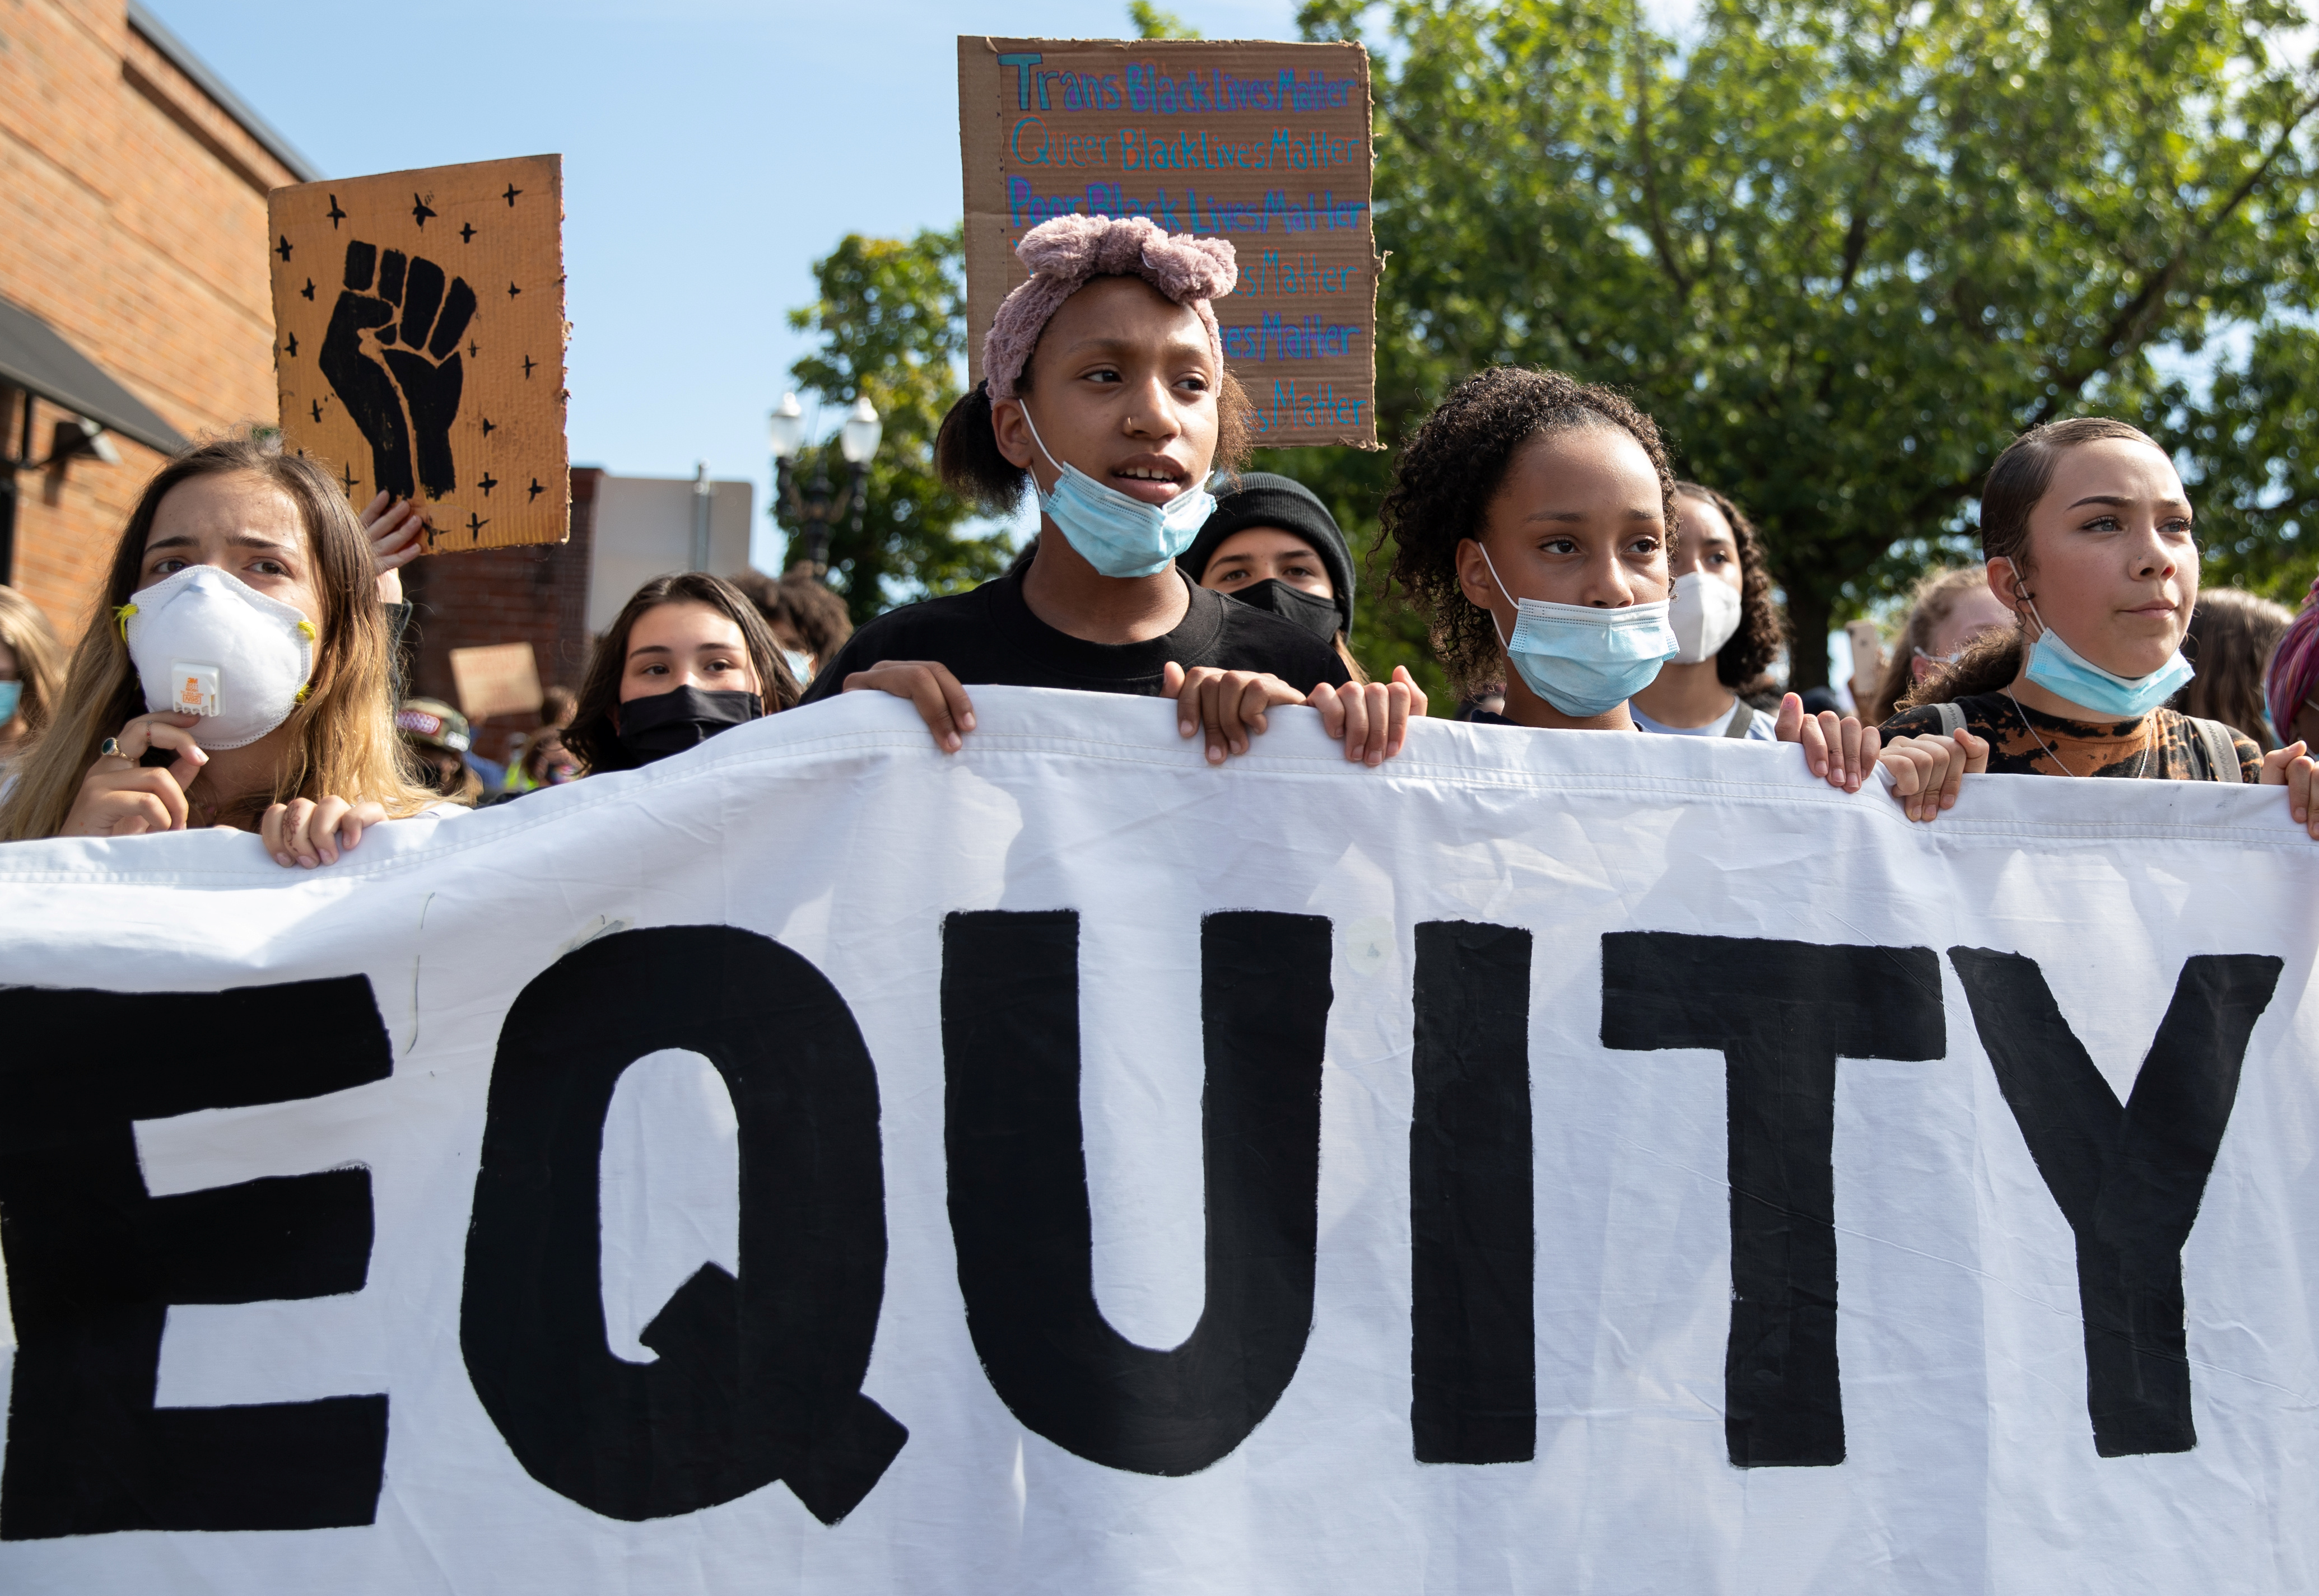 Young protesters march for justice system reform and equity in education in Portland, Oregon, U.S., August 1, 2020. REUTERS/Caitlin Ochs